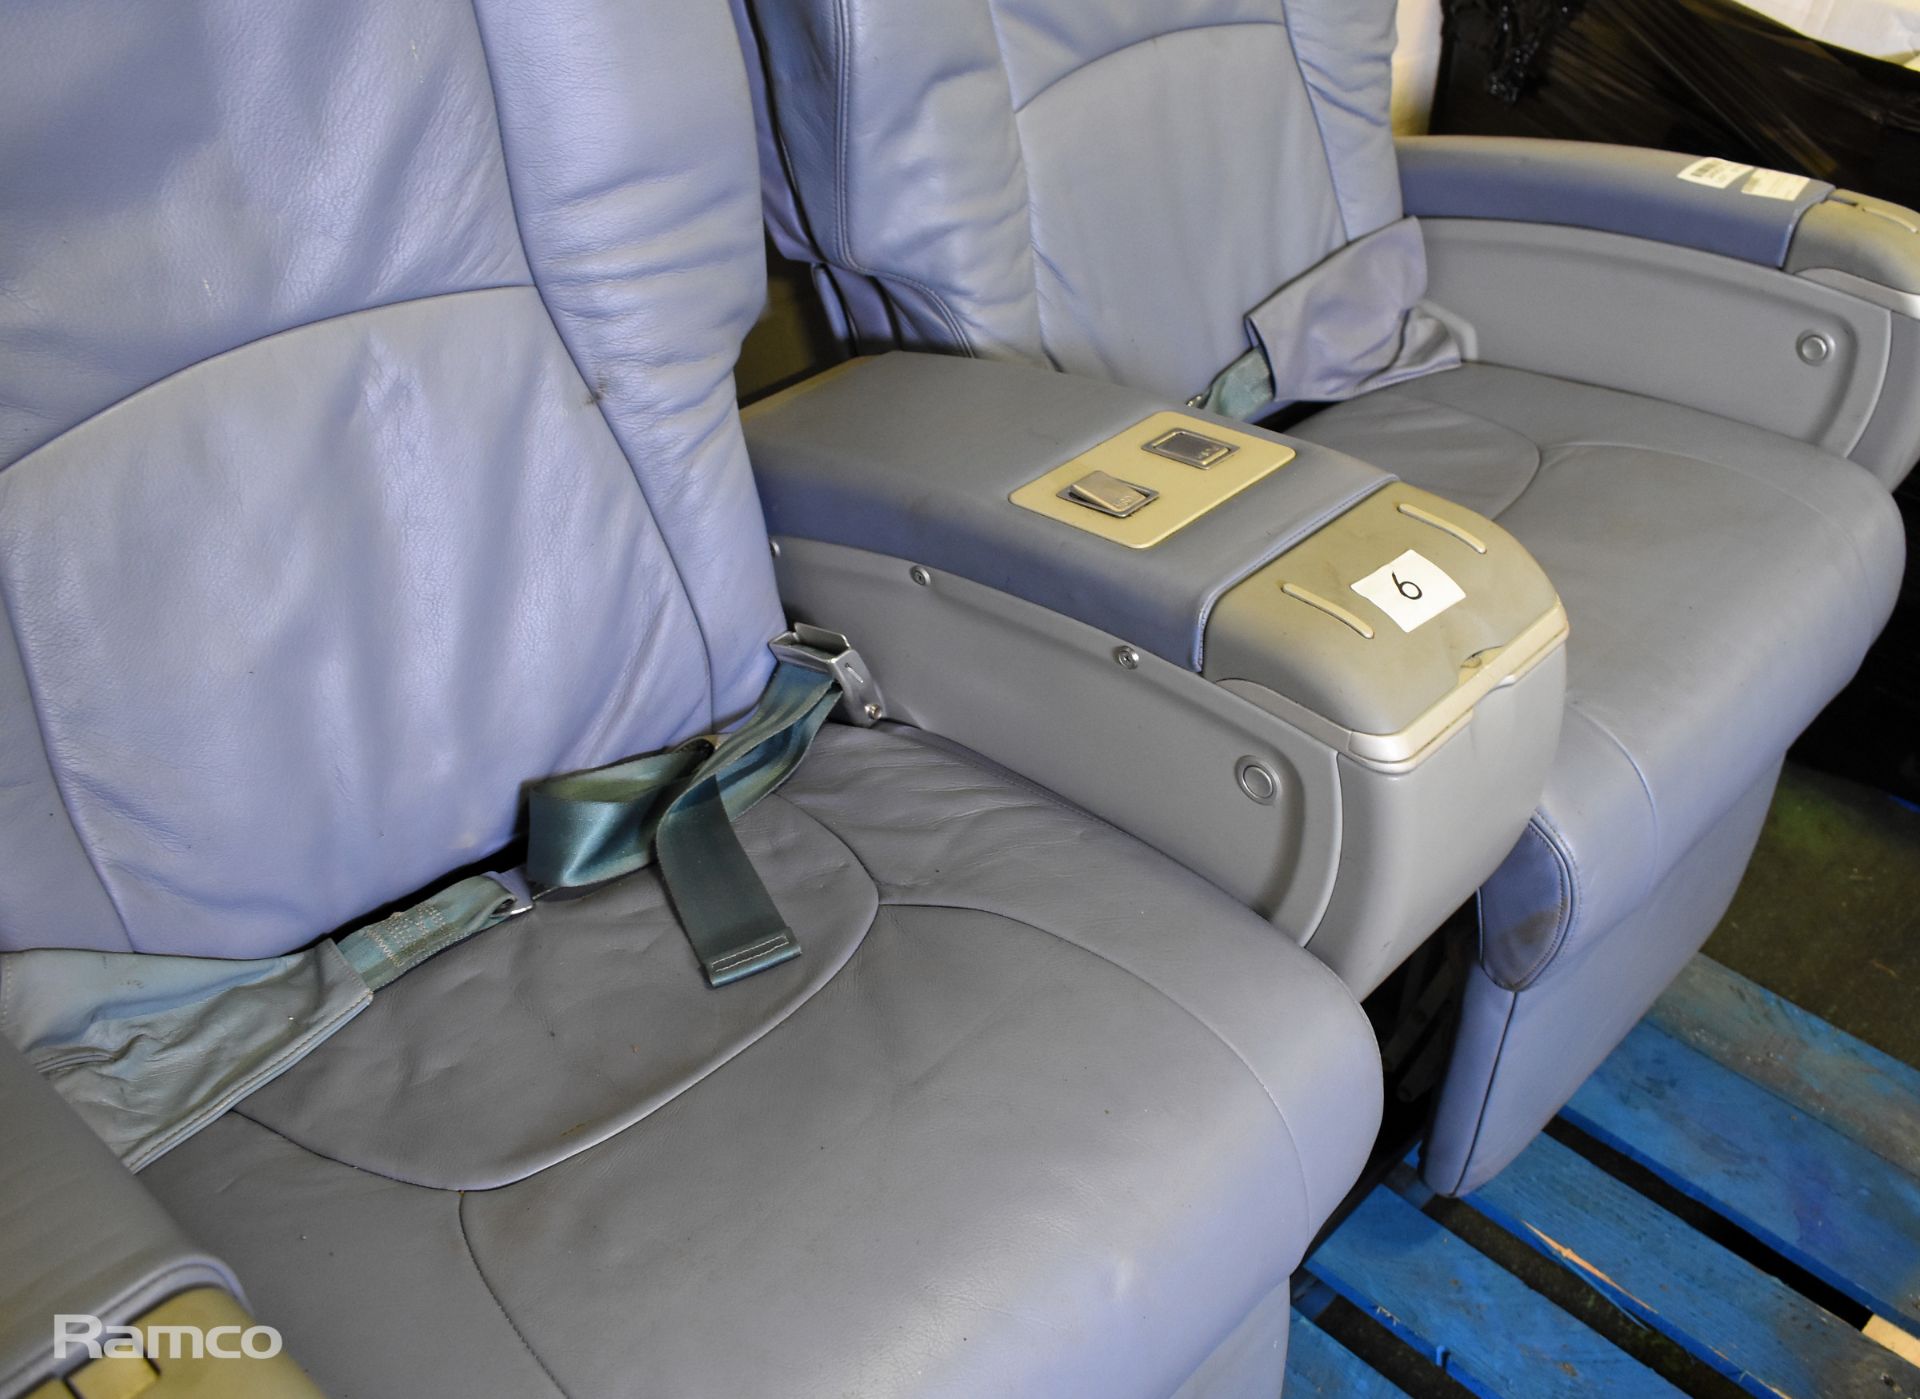 Pair of aircraft seats - W 1300 x D 770 x H 1200mm - Image 3 of 8